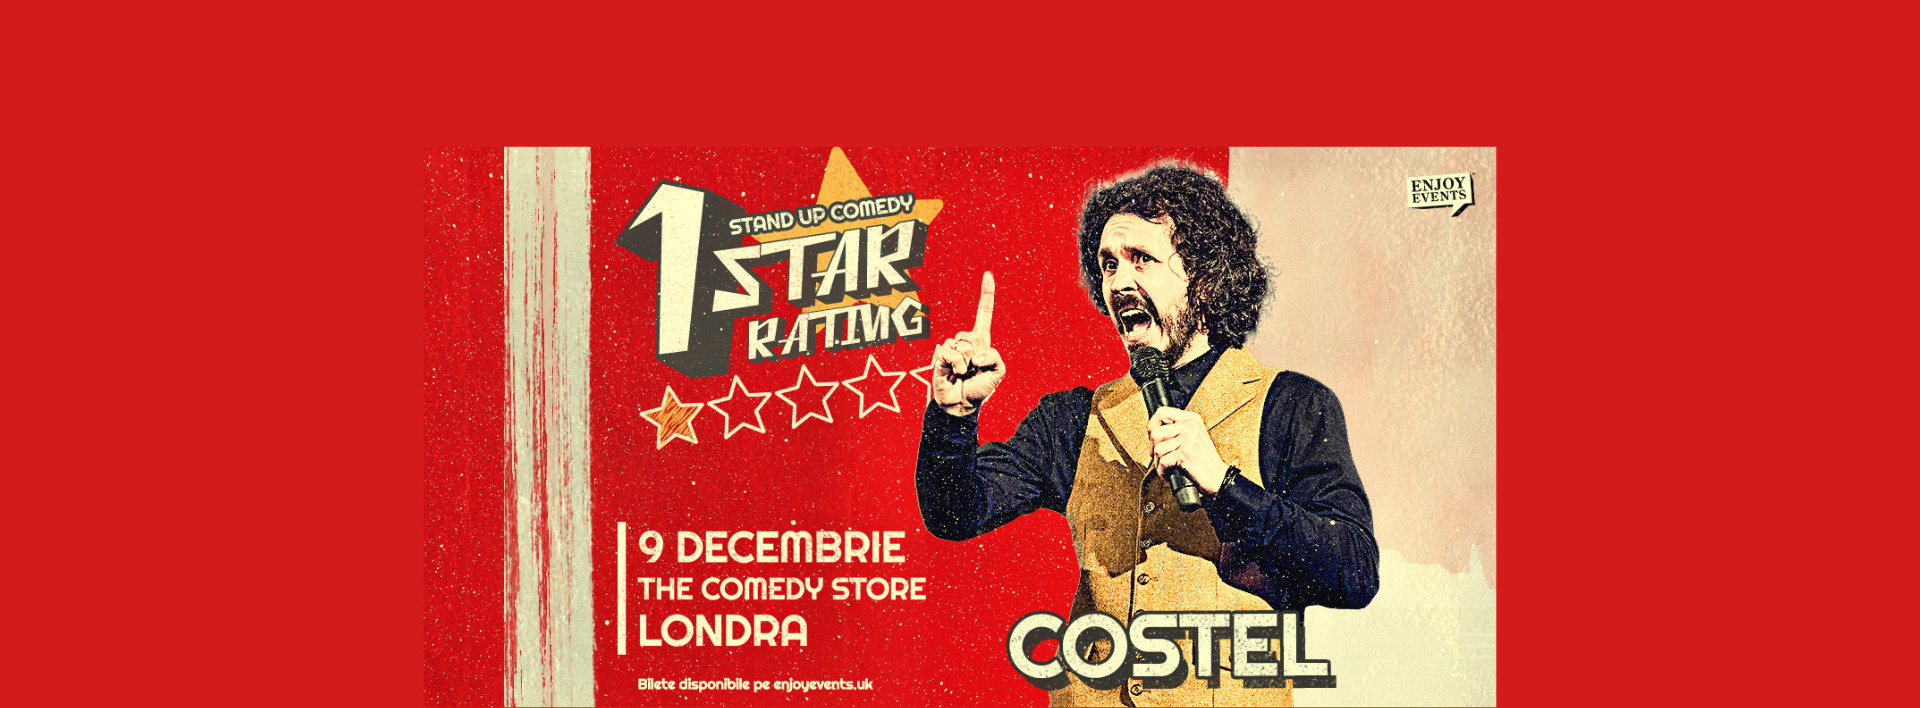 1 Star Rating | COSTEL |